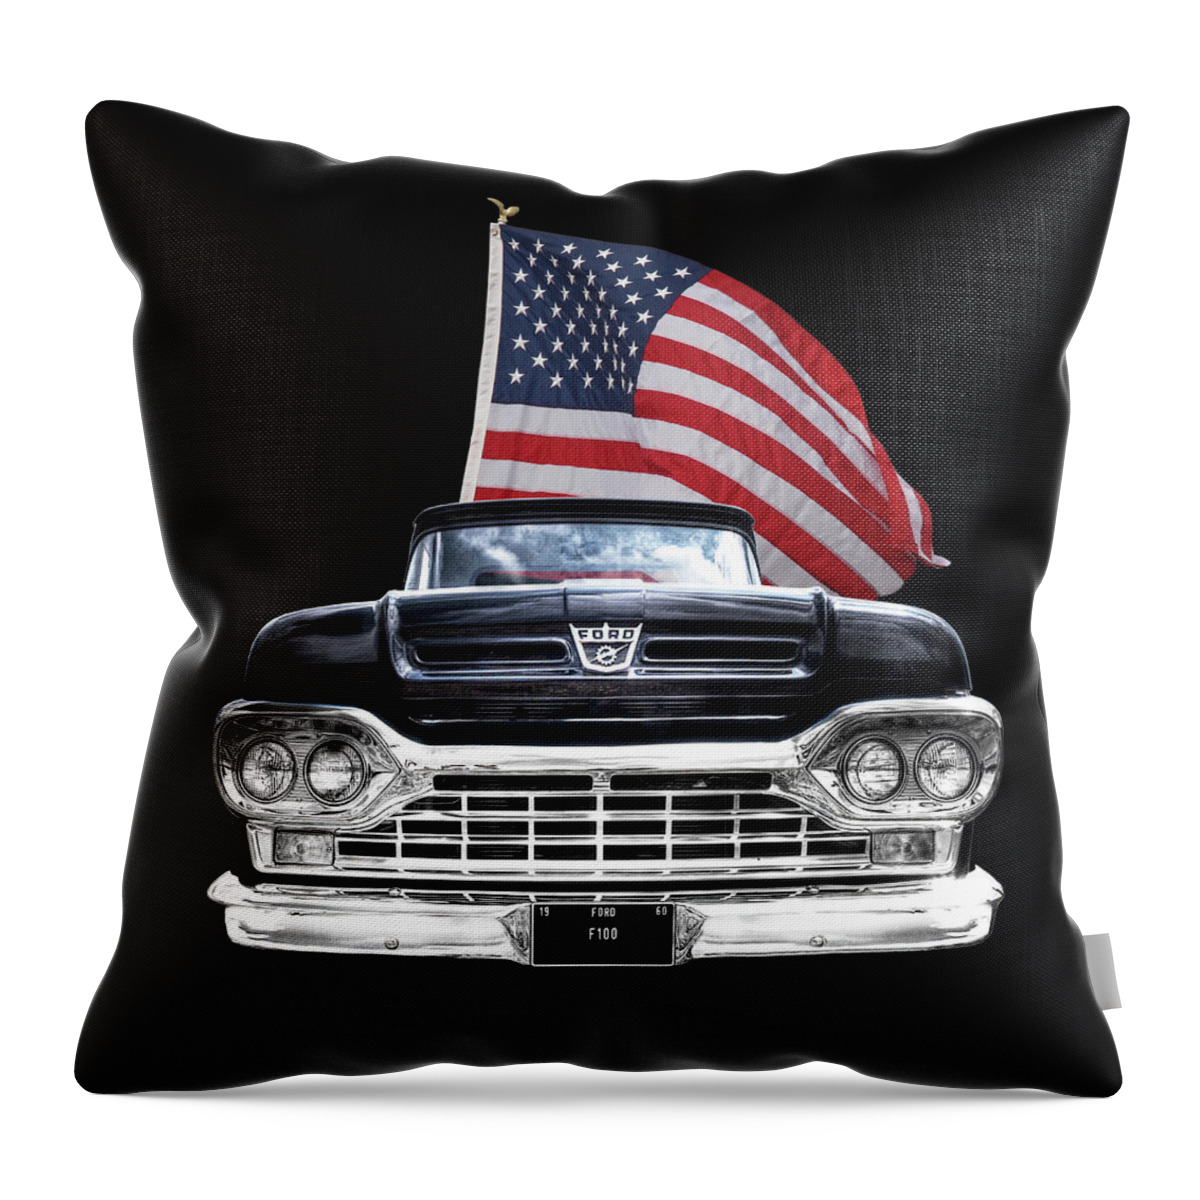 Ford F100 Throw Pillow featuring the photograph Ford F100 With U.S.Flag On Black by Gill Billington